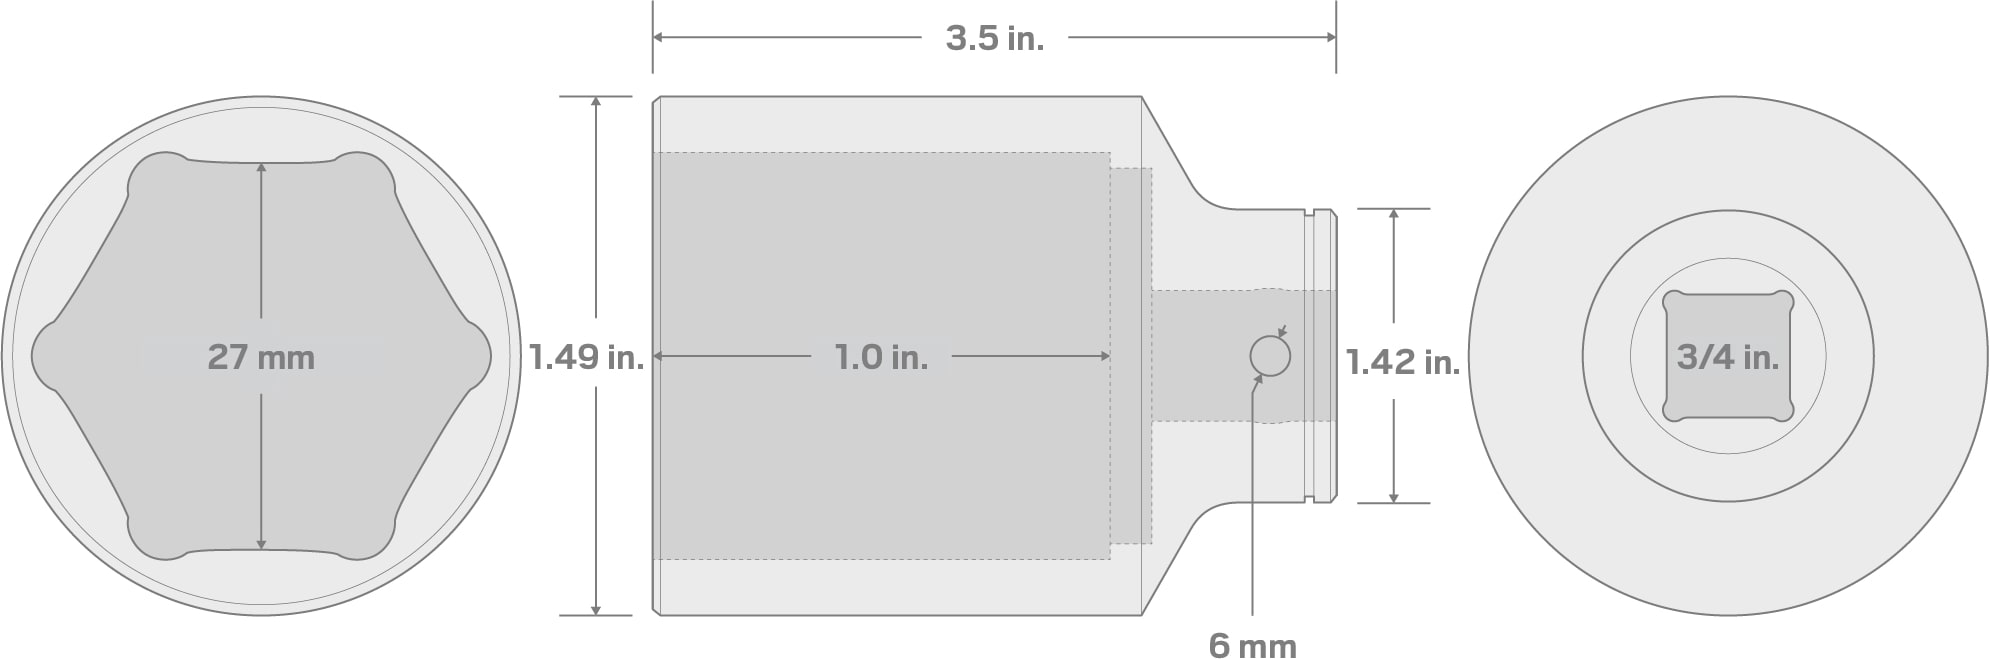 Specs for 3/4 Inch Drive x 27 mm Deep 6-Point Socket